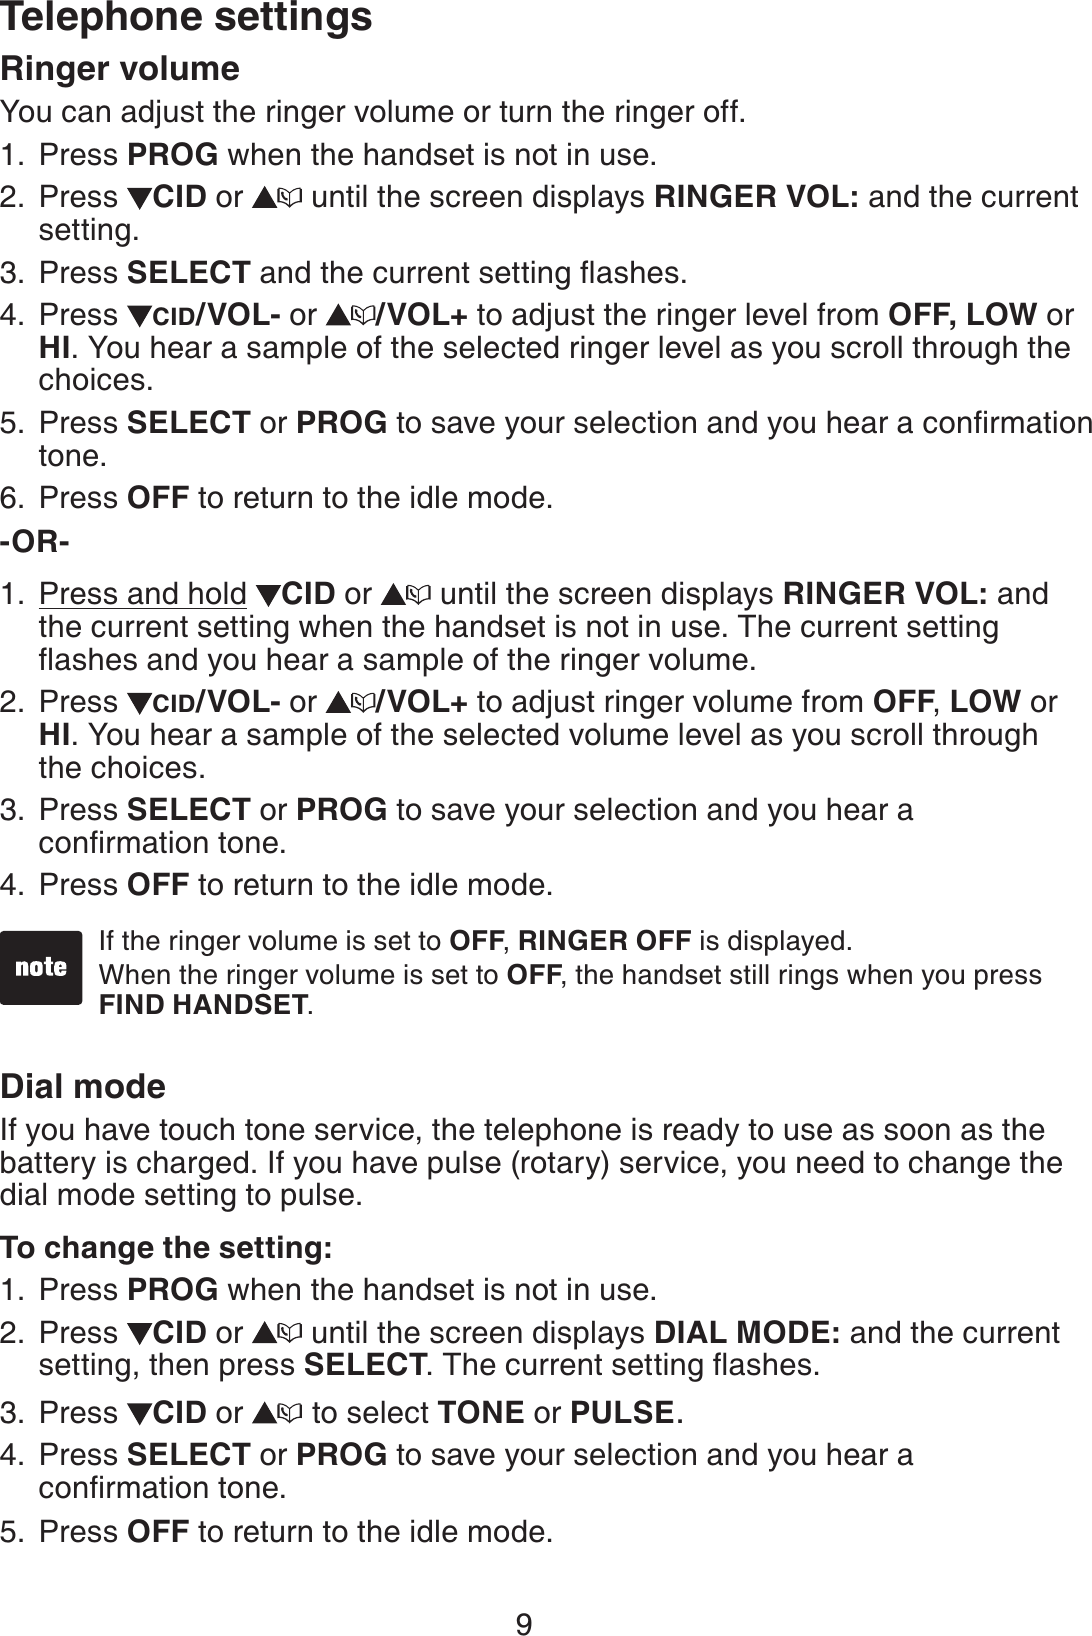 9Telephone settingsRinger volumeYou can adjust the ringer volume or turn the ringer off.Press PROG when the handset is not in use. Press  CID or   until the screen displays RINGER VOL: and the current setting.Press SELECT and the current setting ﬂashes. Press  CID/VOL- or  /VOL+ to adjust the ringer level from OFF, LOW or HI. You hear a sample of the selected ringer level as you scroll through the choices.Press SELECT or PROG to save your selection and you hear a conﬁrmation tone.Press OFF to return to the idle mode.-OR-        Press and hold  CID or   until the screen displays RINGER VOL: and the current setting when the handset is not in use. The current setting ﬂashes and you hear a sample of the ringer volume.Press  CID/VOL- or  /VOL+ to adjust ringer volume from OFF, LOW or HI. You hear a sample of the selected volume level as you scroll through  the choices.Press SELECT or PROG to save your selection and you hear a  conﬁrmation tone.Press OFF to return to the idle mode.Dial modeIf you have touch tone service, the telephone is ready to use as soon as the battery is charged. If you have pulse (rotary) service, you need to change the dial mode setting to pulse.To change the setting:Press PROG when the handset is not in use.Press  CID or   until the screen displays DIAL MODE: and the current setting, then press SELECT. The current setting ﬂashes.Press  CID or   to select TONE or PULSE.Press SELECT or PROG to save your selection and you hear a  conﬁrmation tone.Press OFF to return to the idle mode.1.2.3.4.5.6.1.2.3.4.1.2.3.4.5.If the ringer volume is set to OFF, RINGER OFF is displayed.When the ringer volume is set to OFF, the handset still rings when you press FIND HANDSET.••